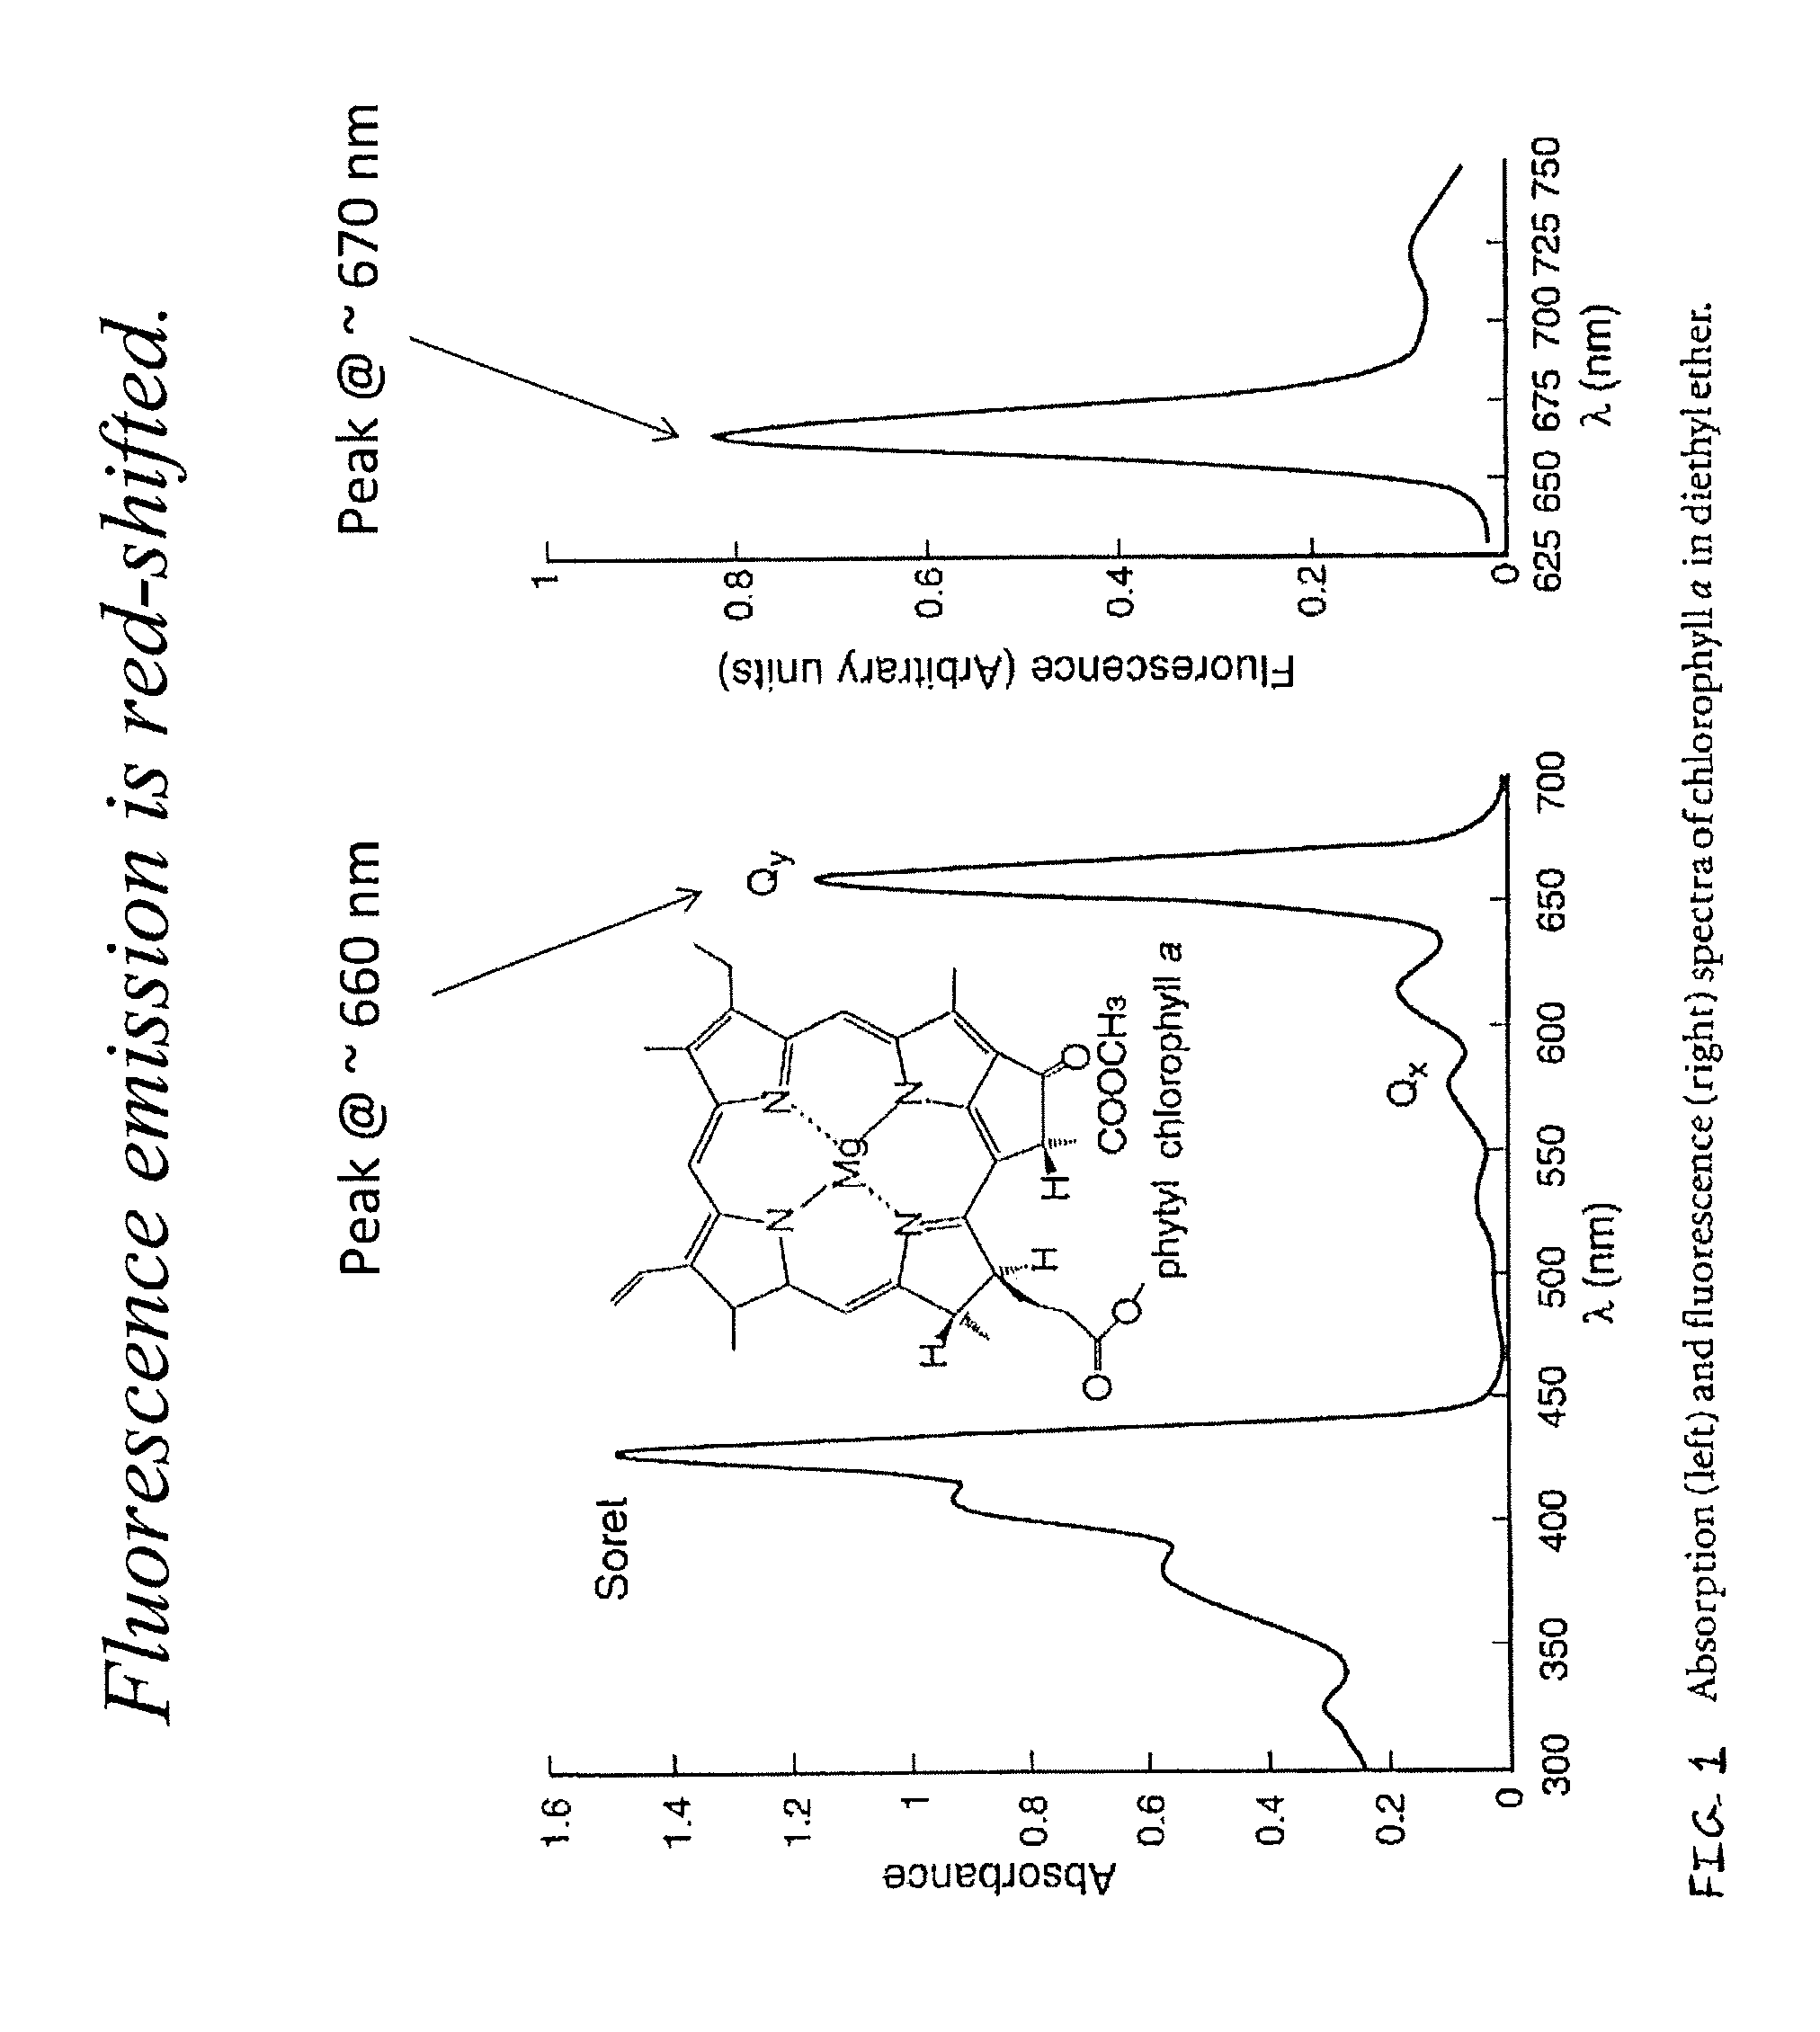 Systems and methods for estimating photosynthetic carbon assimlation